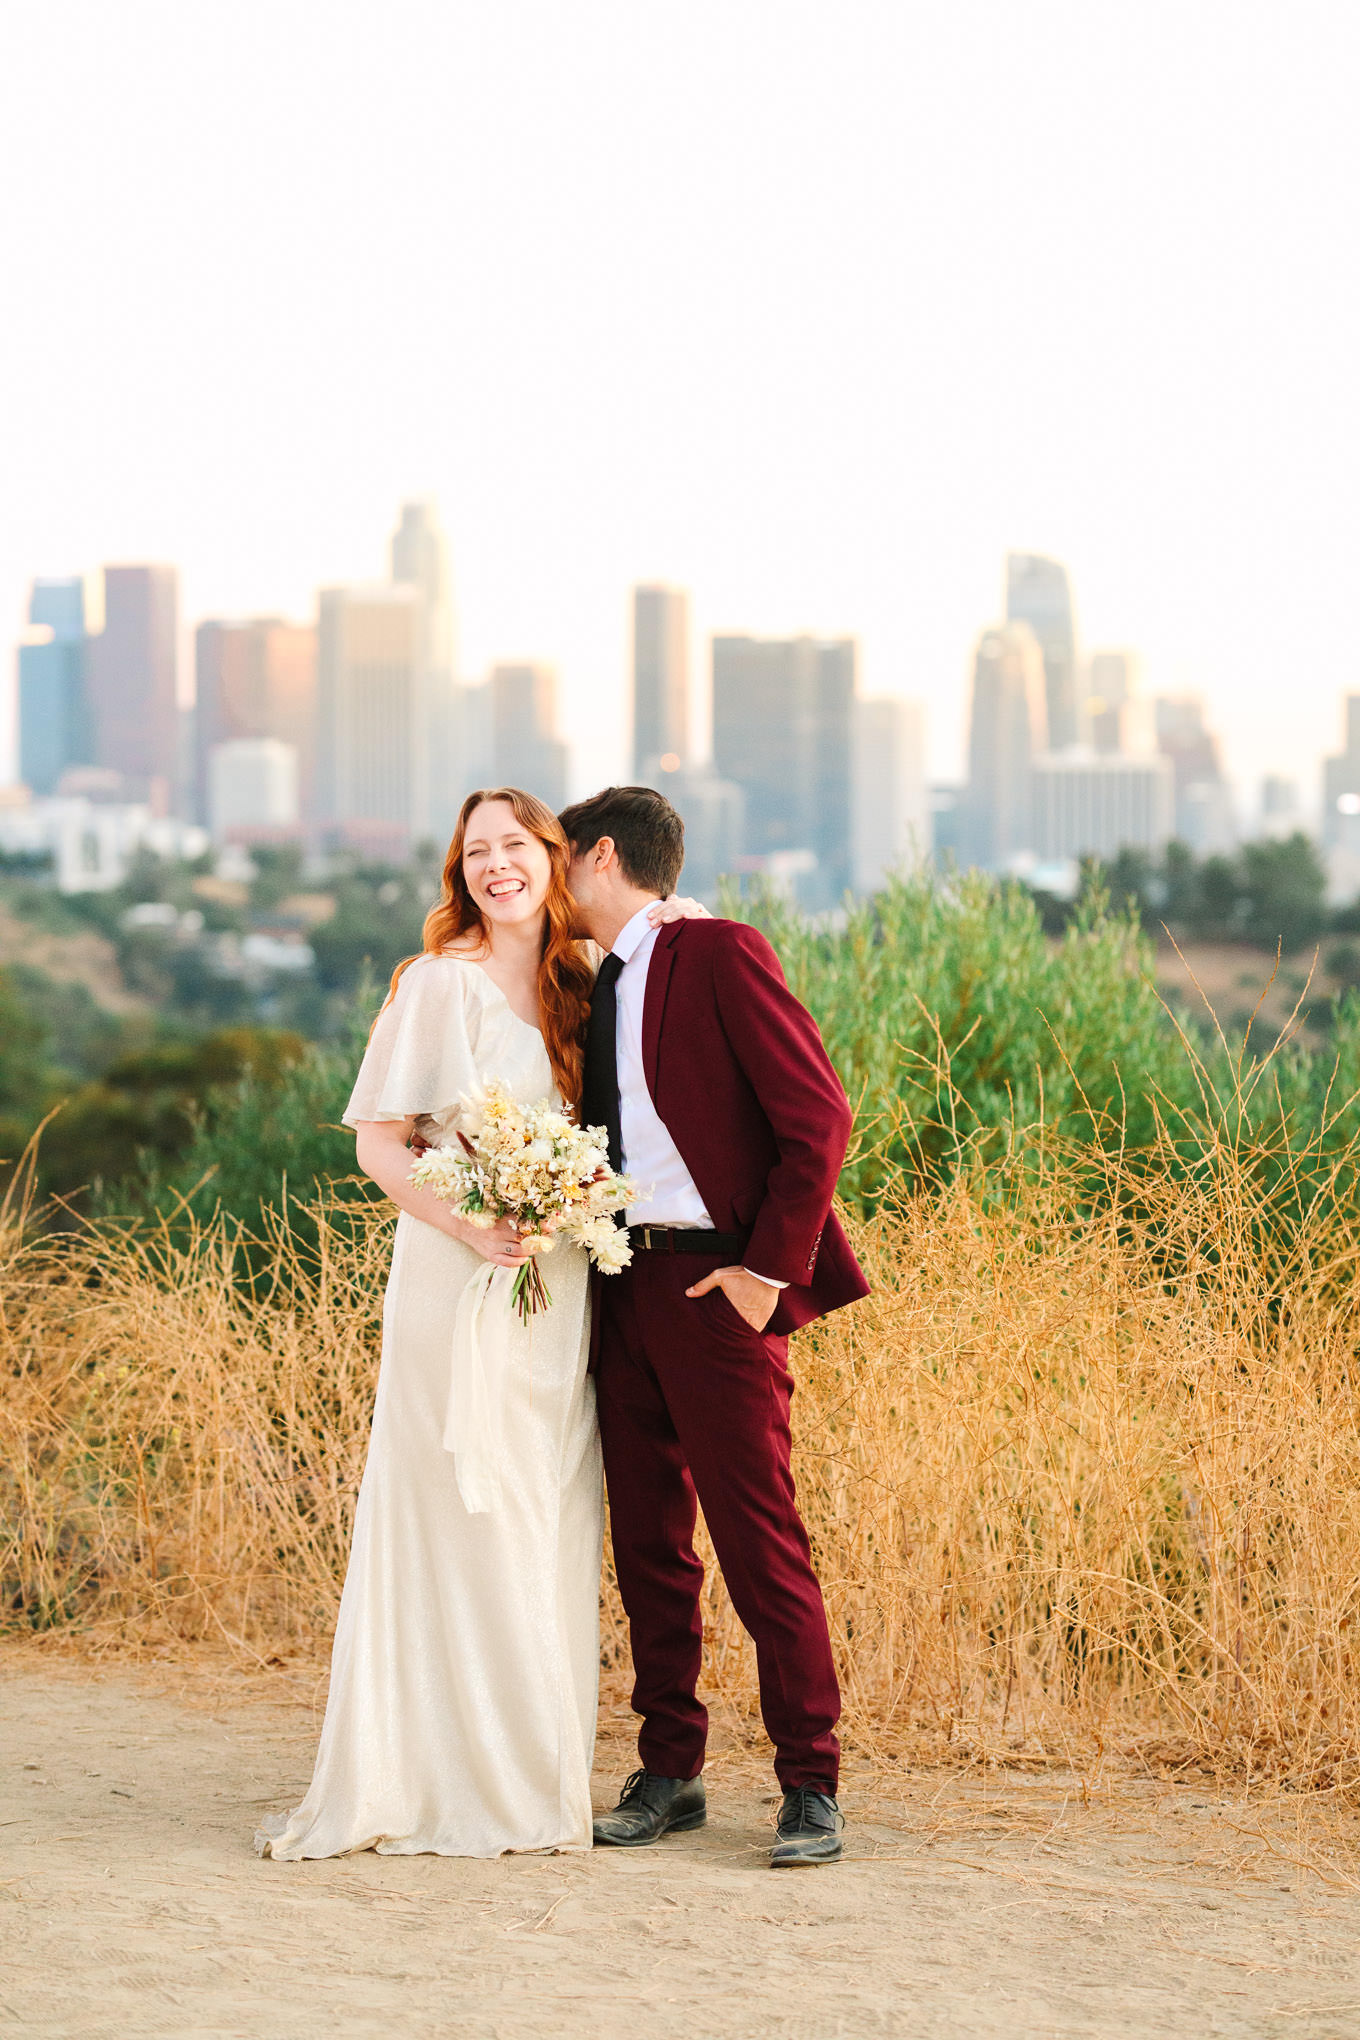 Elopement in front of LA skyline | Los Angeles Elysian Park Elopement | Colorful and elevated wedding photography for fun-loving couples in Southern California | #LosAngelesElopement #elopement #LAarboretum #LAskyline #elopementphotos   Source: Mary Costa Photography | Los Angeles